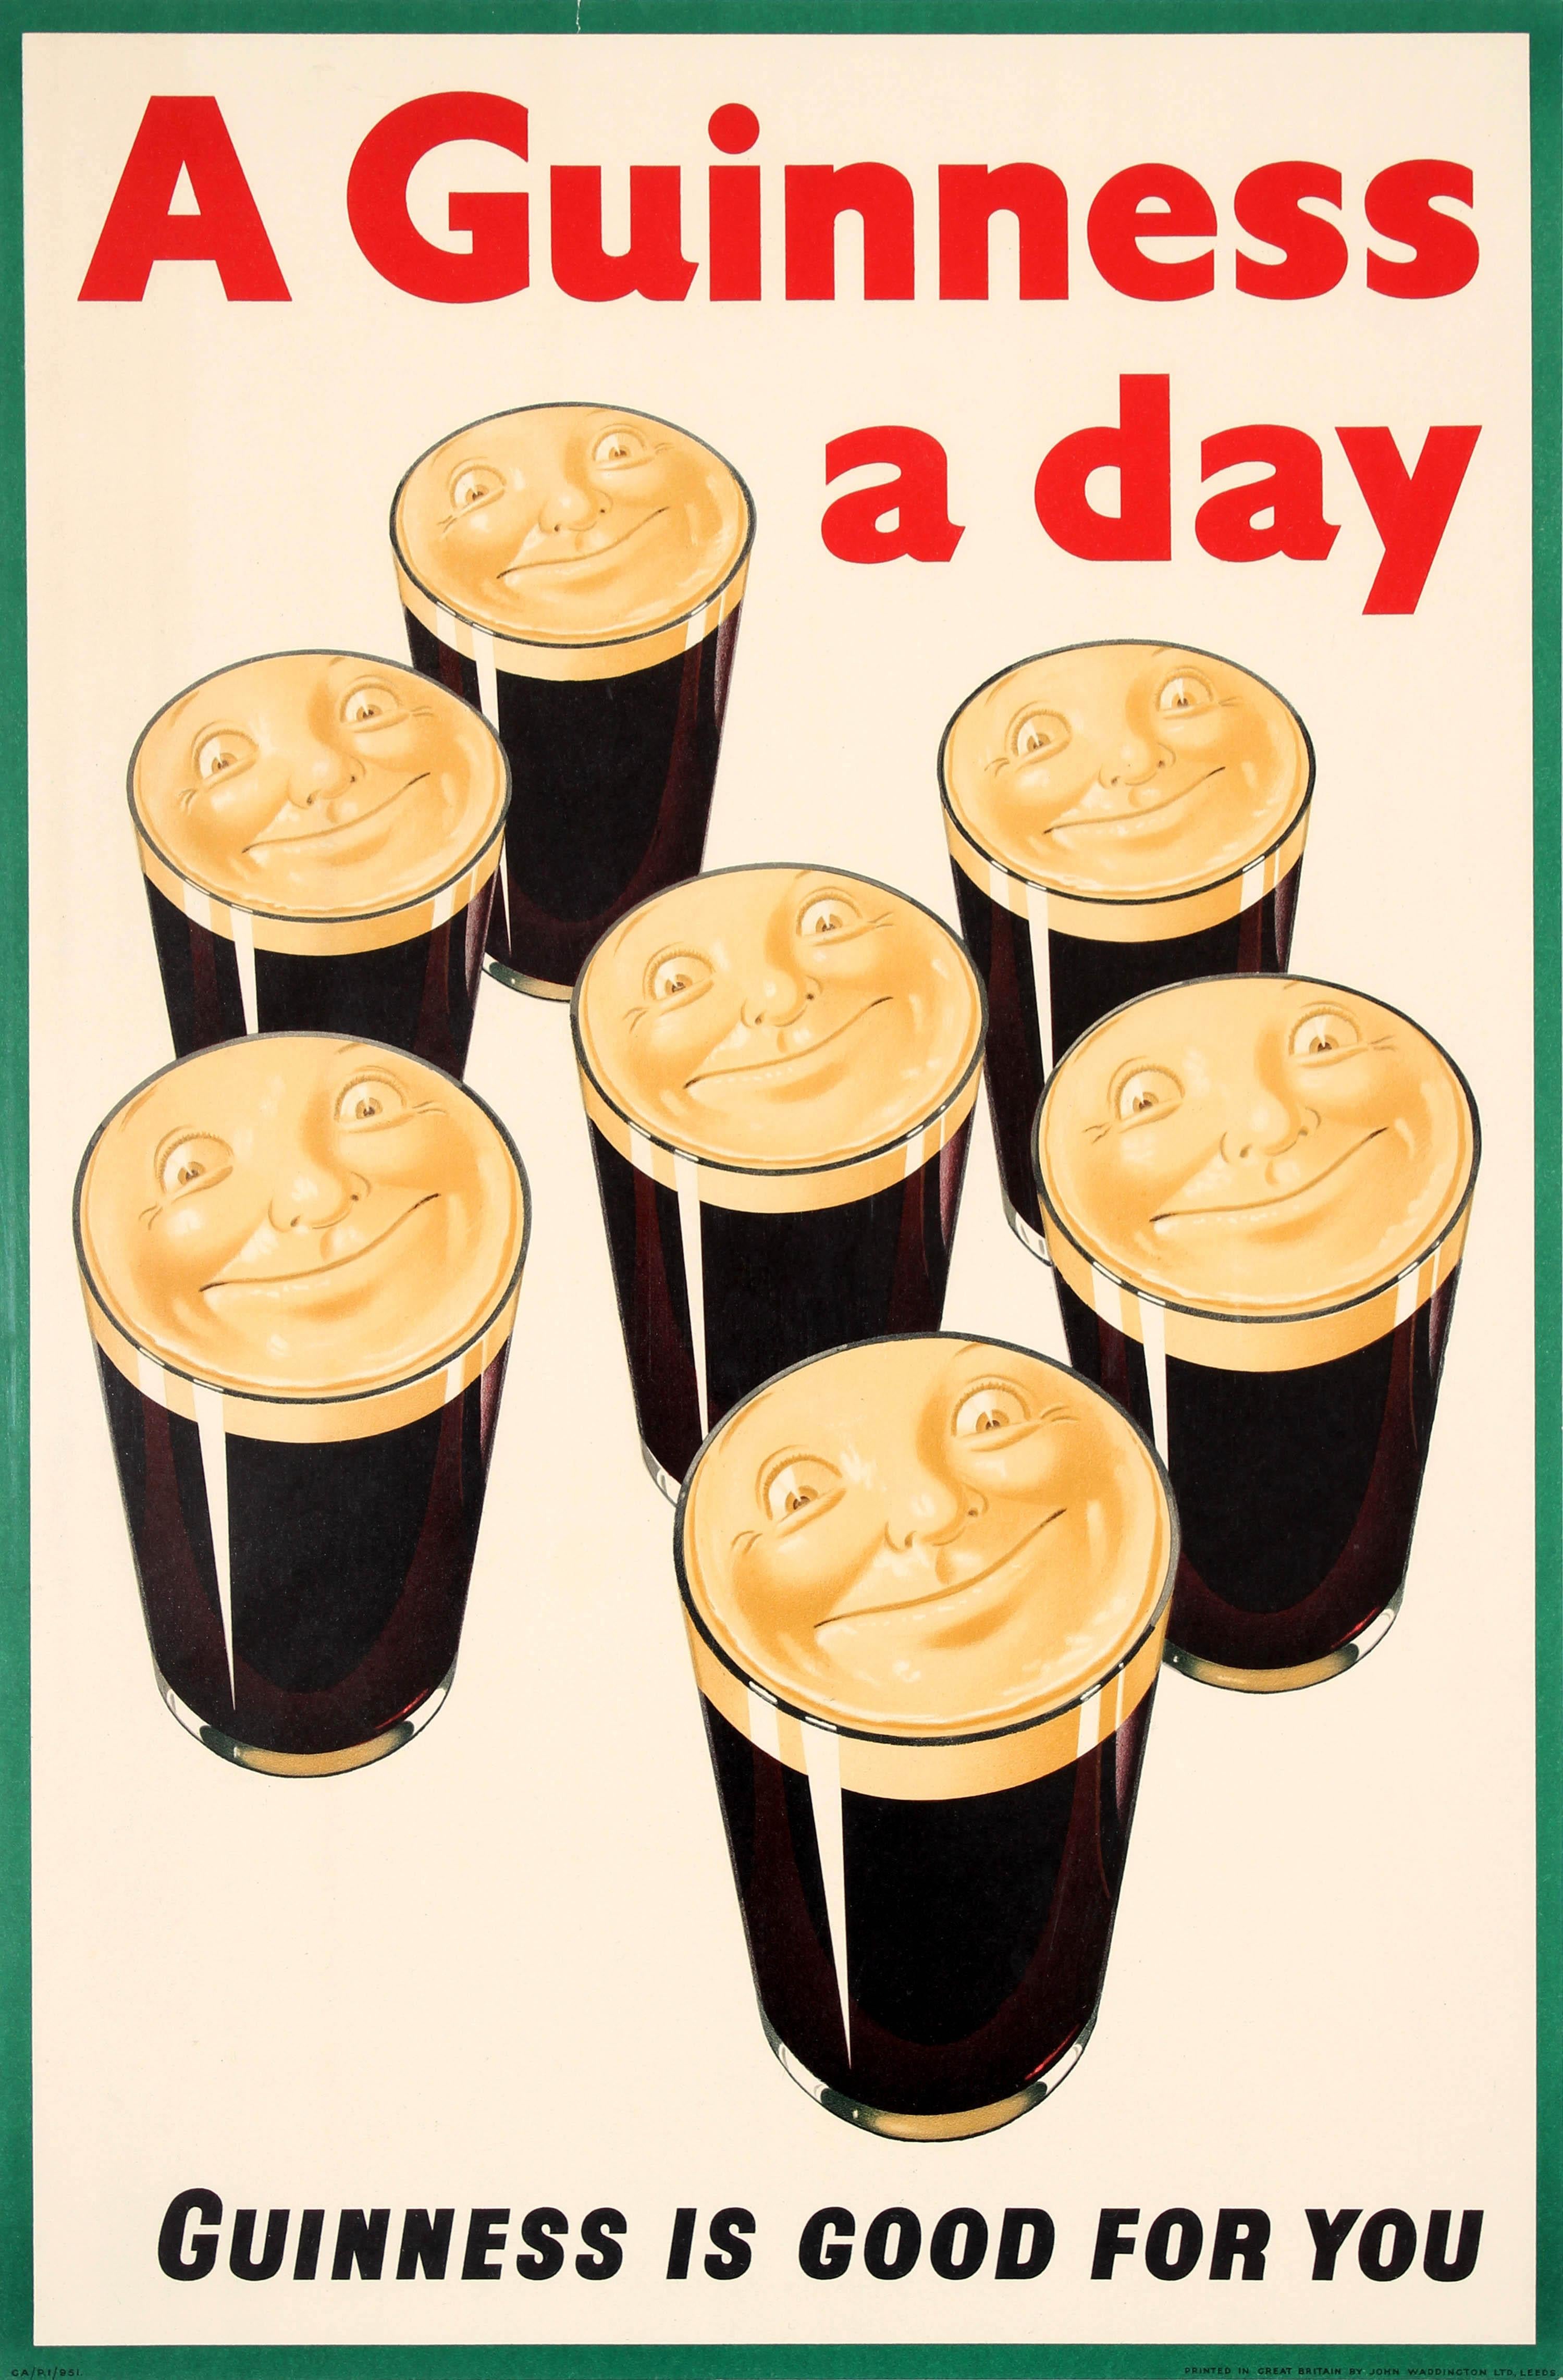 Unknown Print - Original Vintage Guinness Is Good For You Poster A Guinness A Day Beer Drink Ad